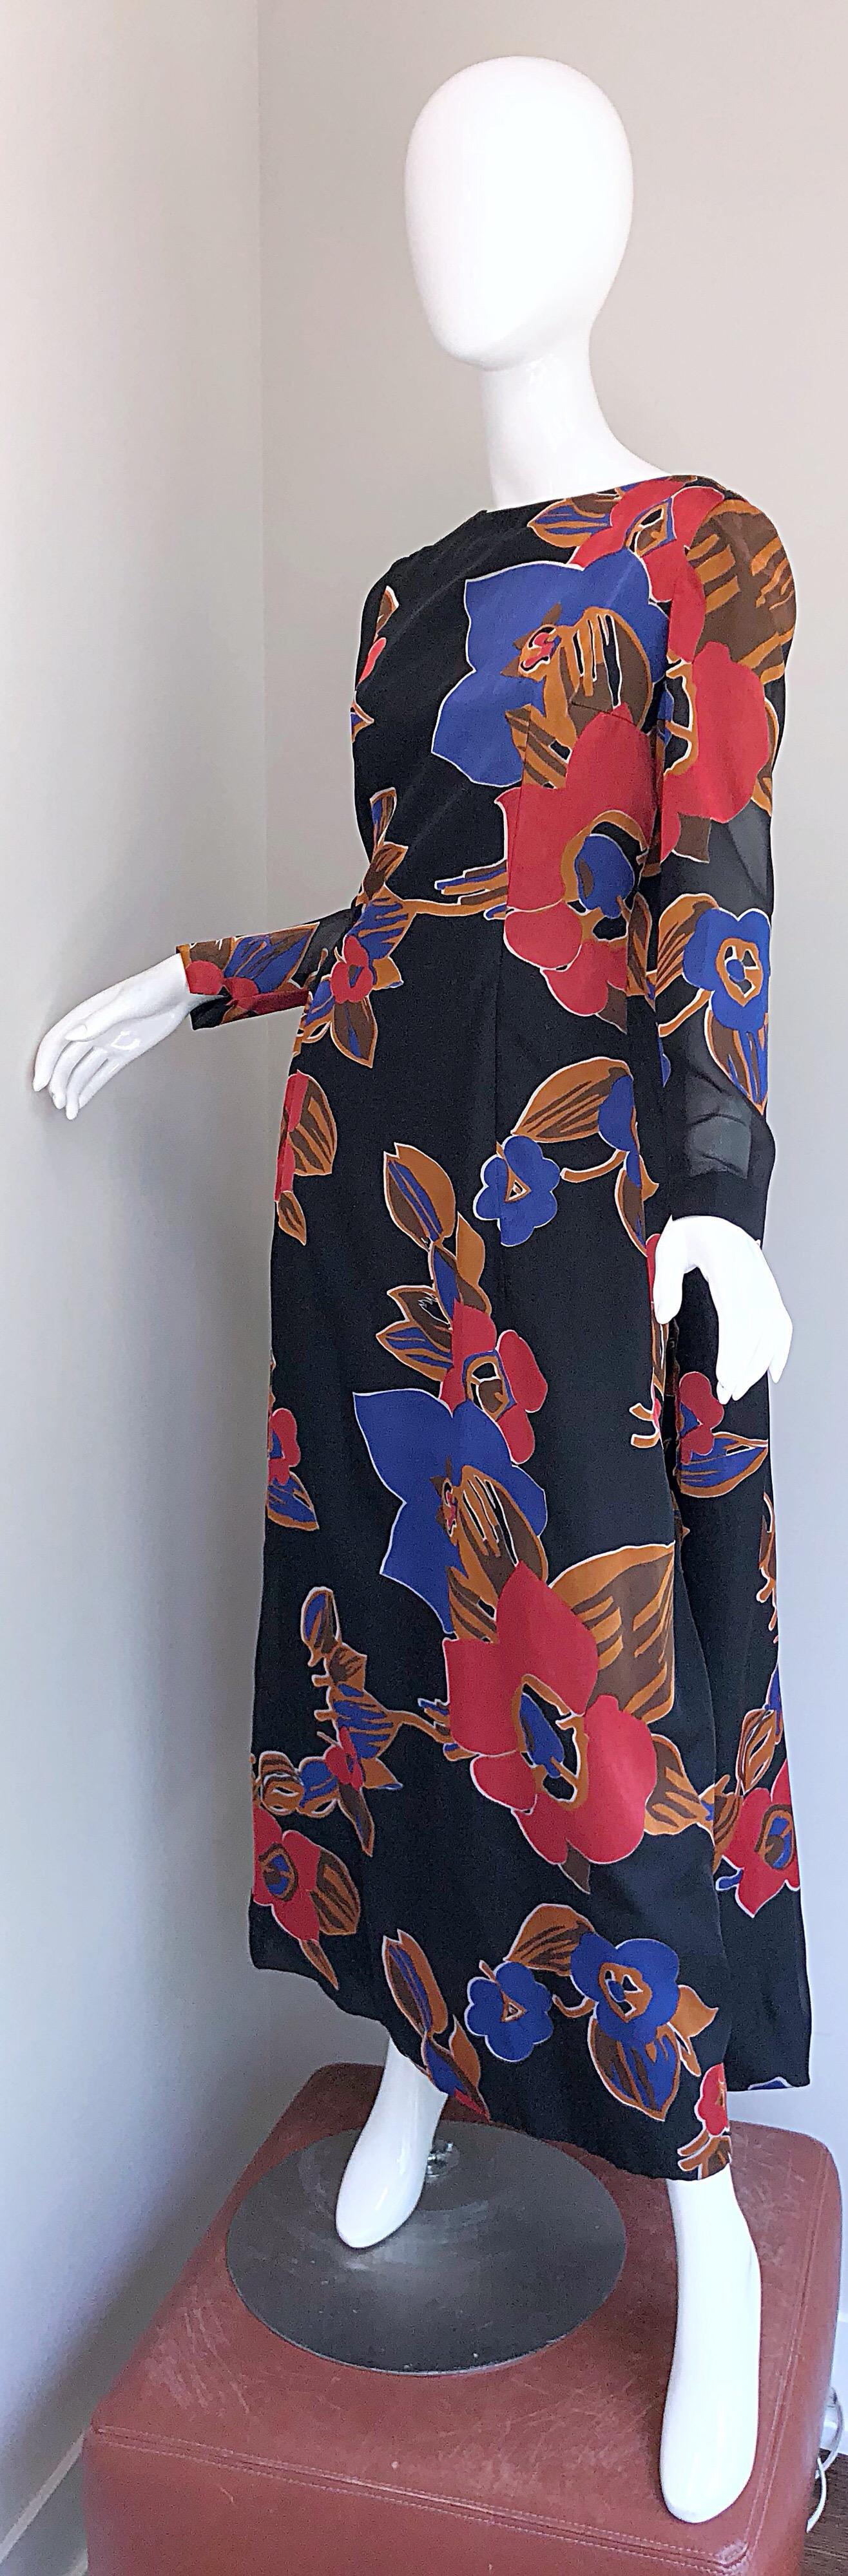 1960s John Boyle Bishop Black + Brown + Red Abstract Trained 60s Gown Maxi Dress For Sale 4